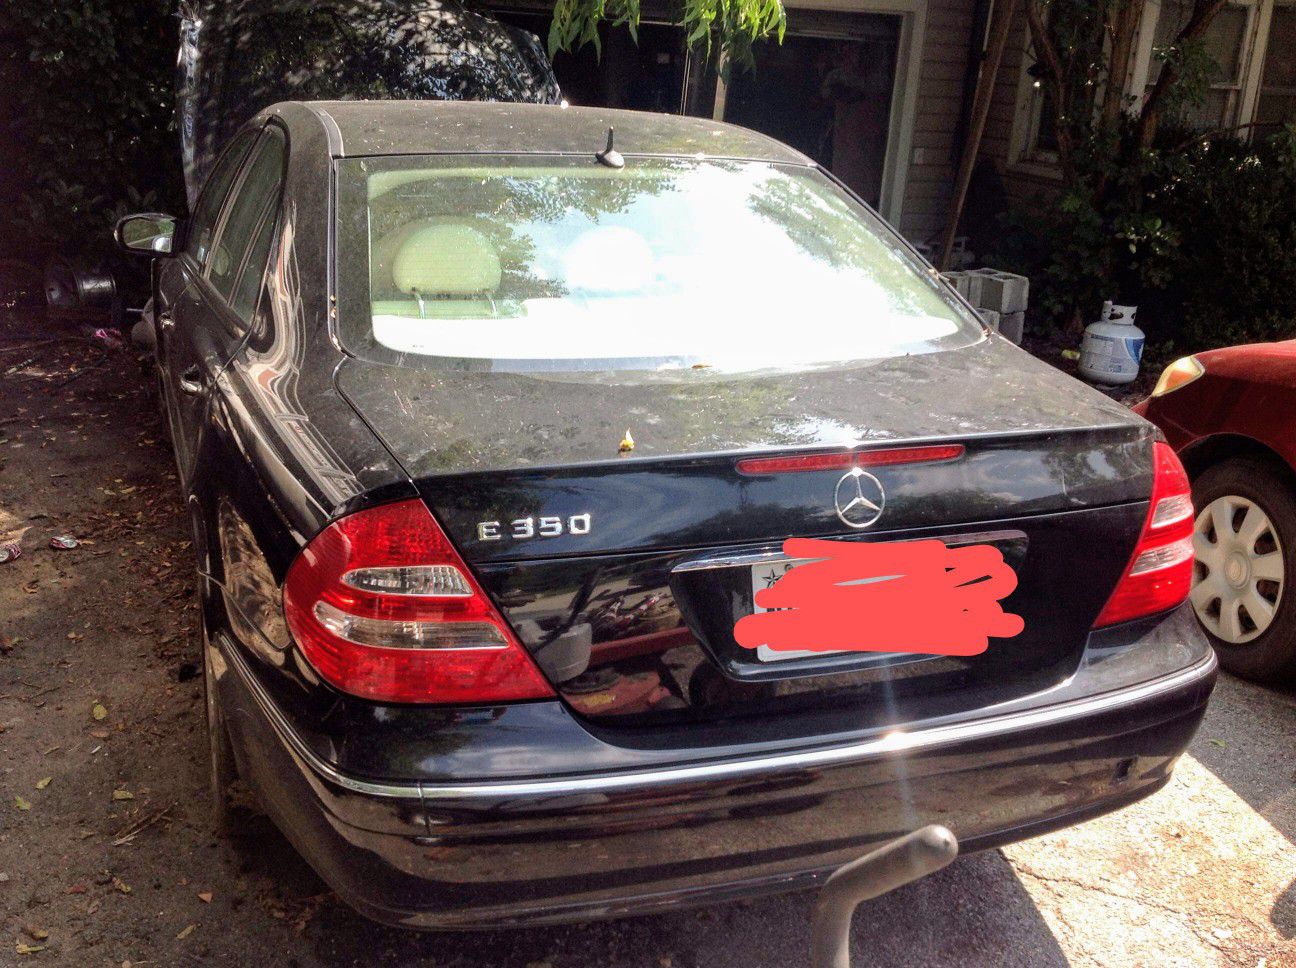 Mercedes E 350 2008 for parts or repair. Has title and will start and run but as you see, totalled front end.